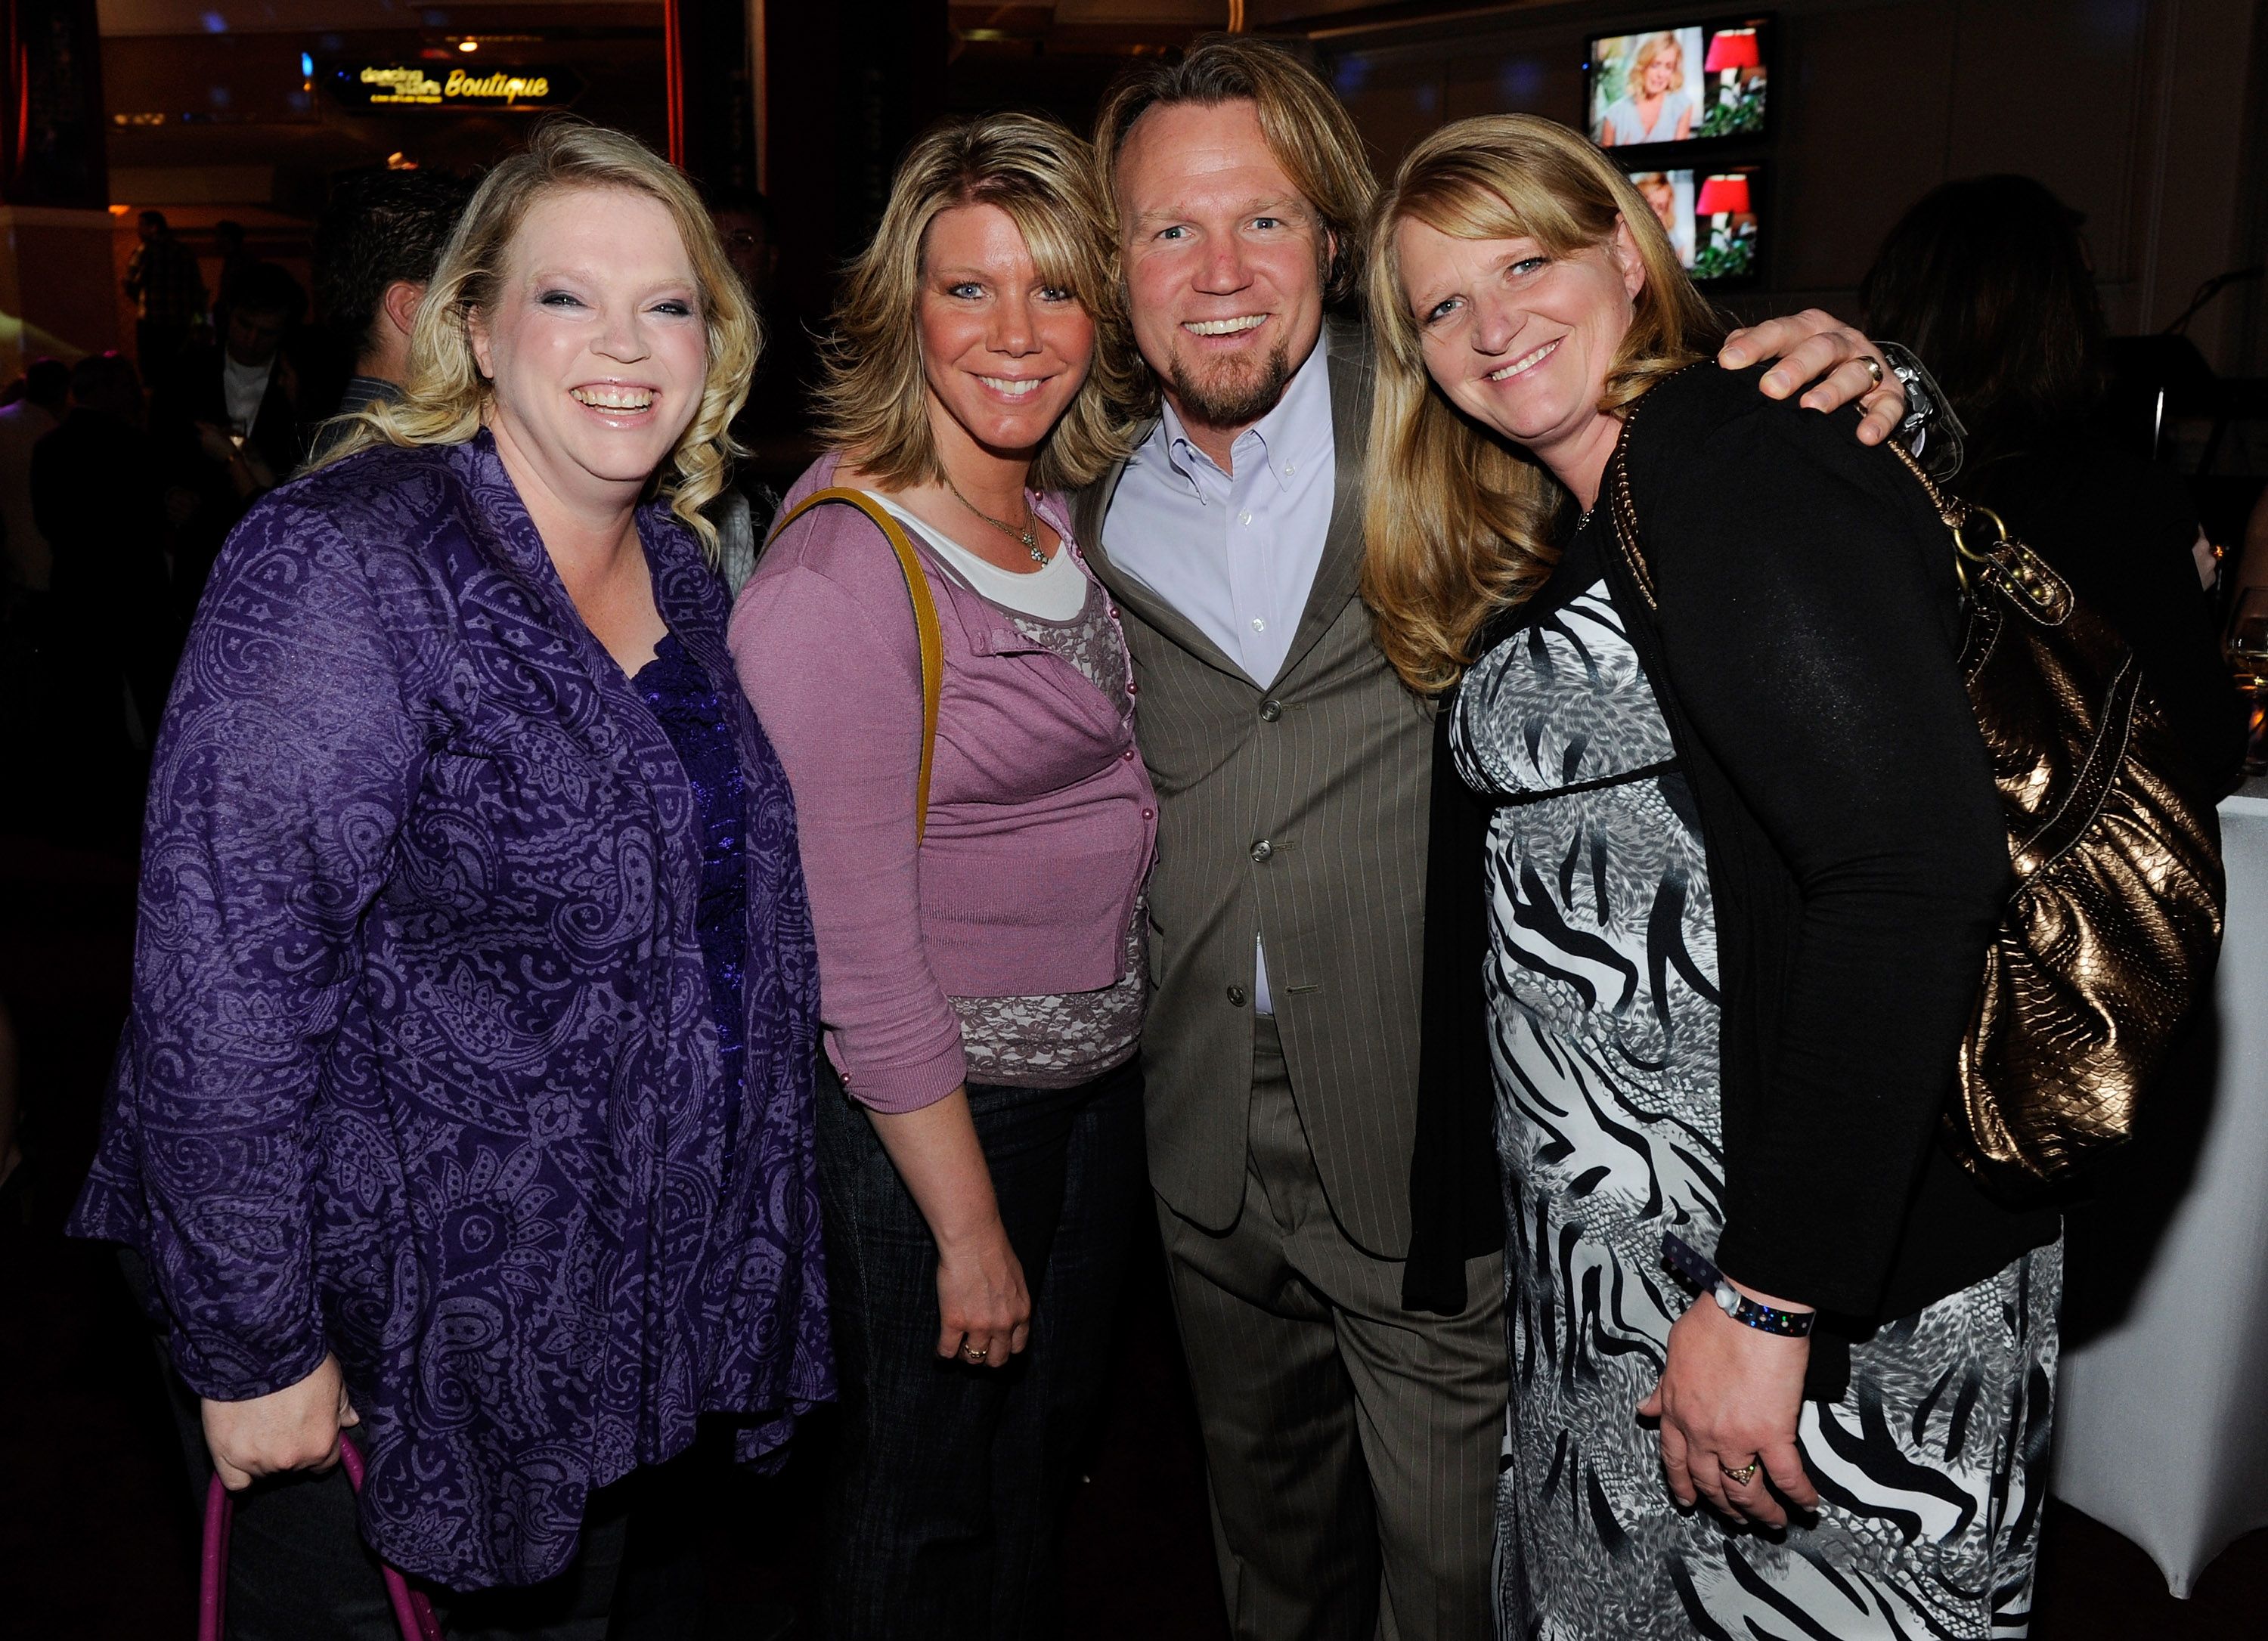 Janelle Brown, Meri Brown, Kody Brown and Christine Brown from "Sister Wives" at a pre-show reception for the grand opening of "Dancing With the Stars: Live in Las Vegas" at the New Tropicana Las Vegas April 13, 2012 | Photo: Getty Images